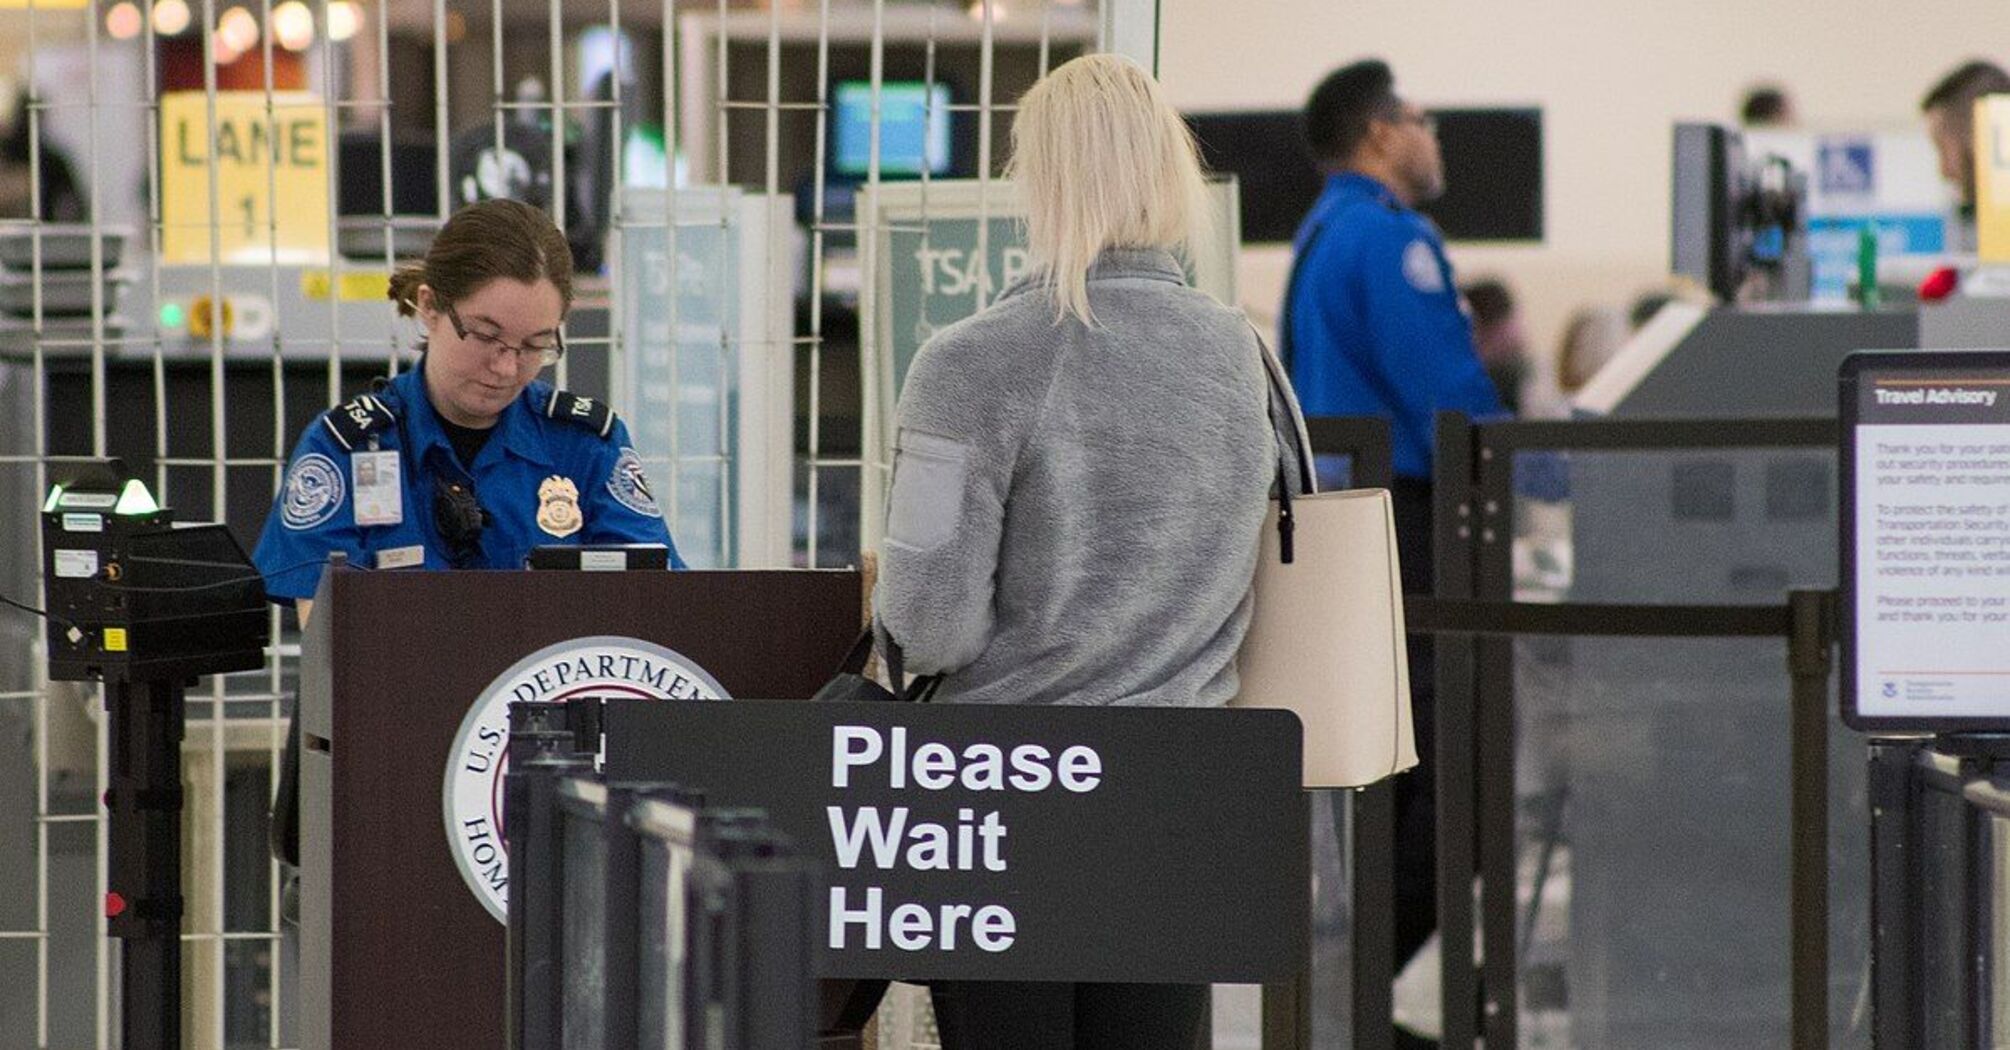 Behind the scenes: the truth about how scanners and airport security work